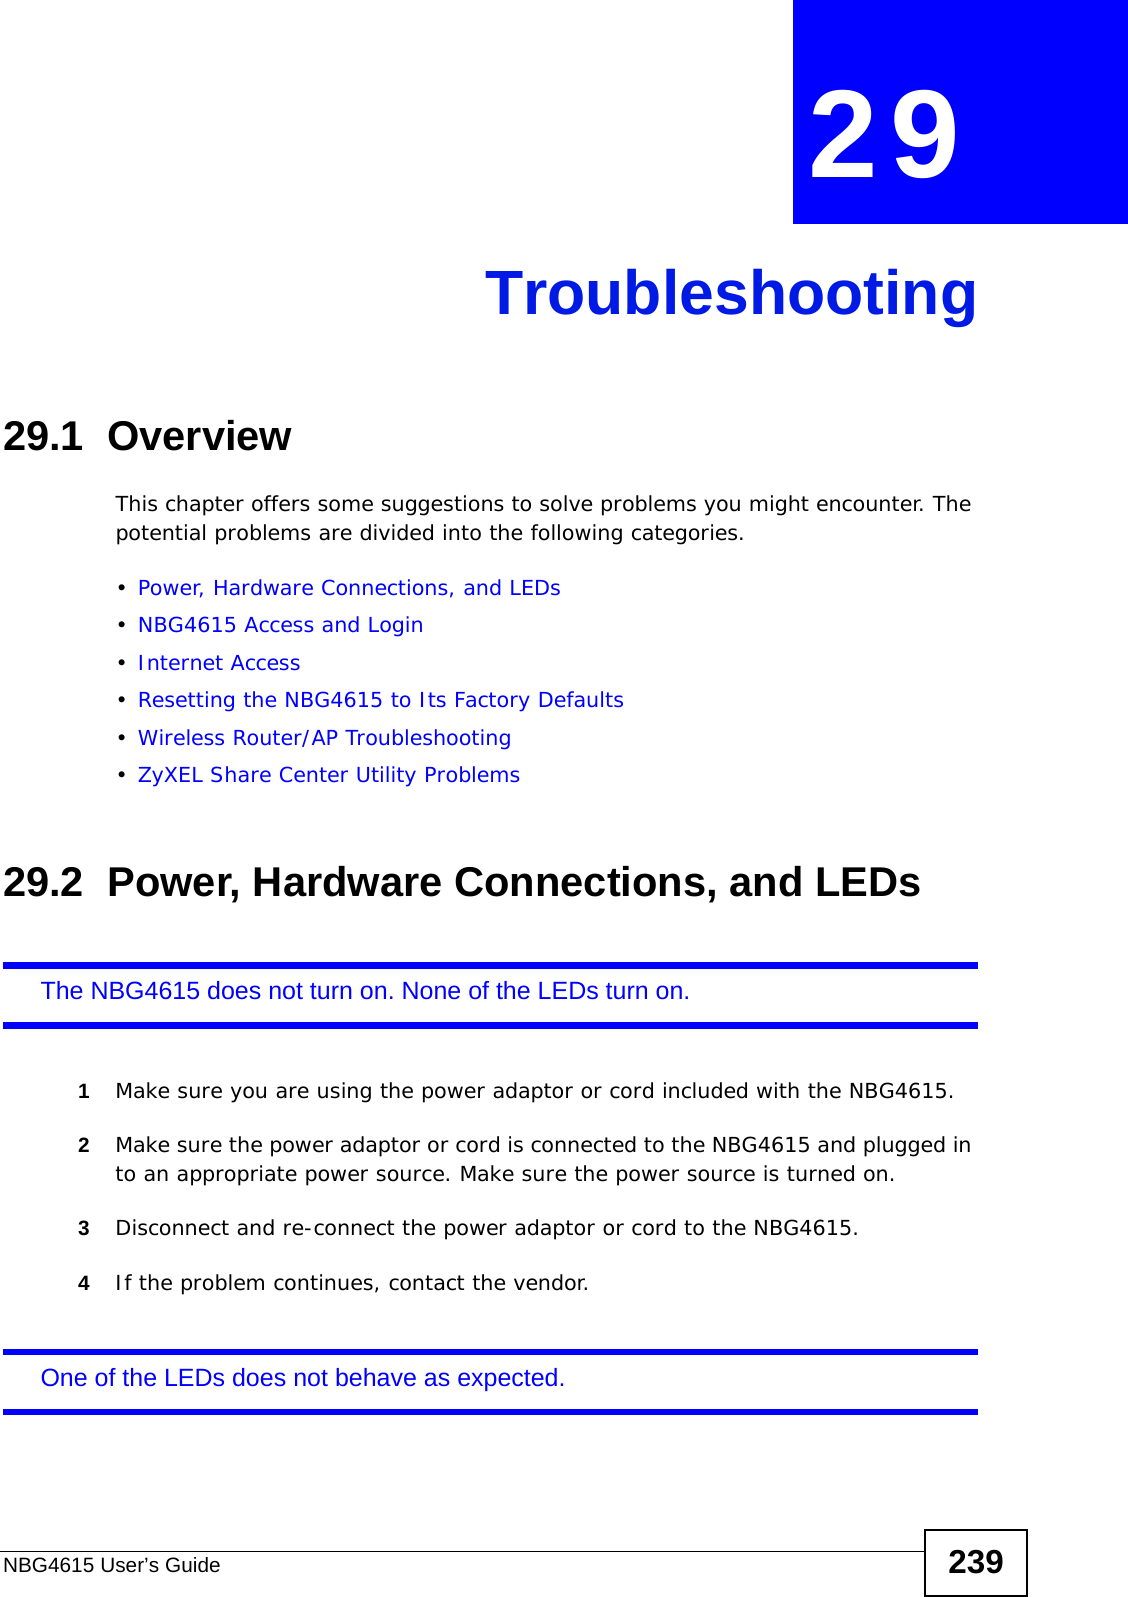 NBG4615 User’s Guide 239CHAPTER  29 Troubleshooting29.1  OverviewThis chapter offers some suggestions to solve problems you might encounter. The potential problems are divided into the following categories. •Power, Hardware Connections, and LEDs•NBG4615 Access and Login•Internet Access•Resetting the NBG4615 to Its Factory Defaults•Wireless Router/AP Troubleshooting•ZyXEL Share Center Utility Problems29.2  Power, Hardware Connections, and LEDsThe NBG4615 does not turn on. None of the LEDs turn on.1Make sure you are using the power adaptor or cord included with the NBG4615.2Make sure the power adaptor or cord is connected to the NBG4615 and plugged in to an appropriate power source. Make sure the power source is turned on.3Disconnect and re-connect the power adaptor or cord to the NBG4615.4If the problem continues, contact the vendor.One of the LEDs does not behave as expected.